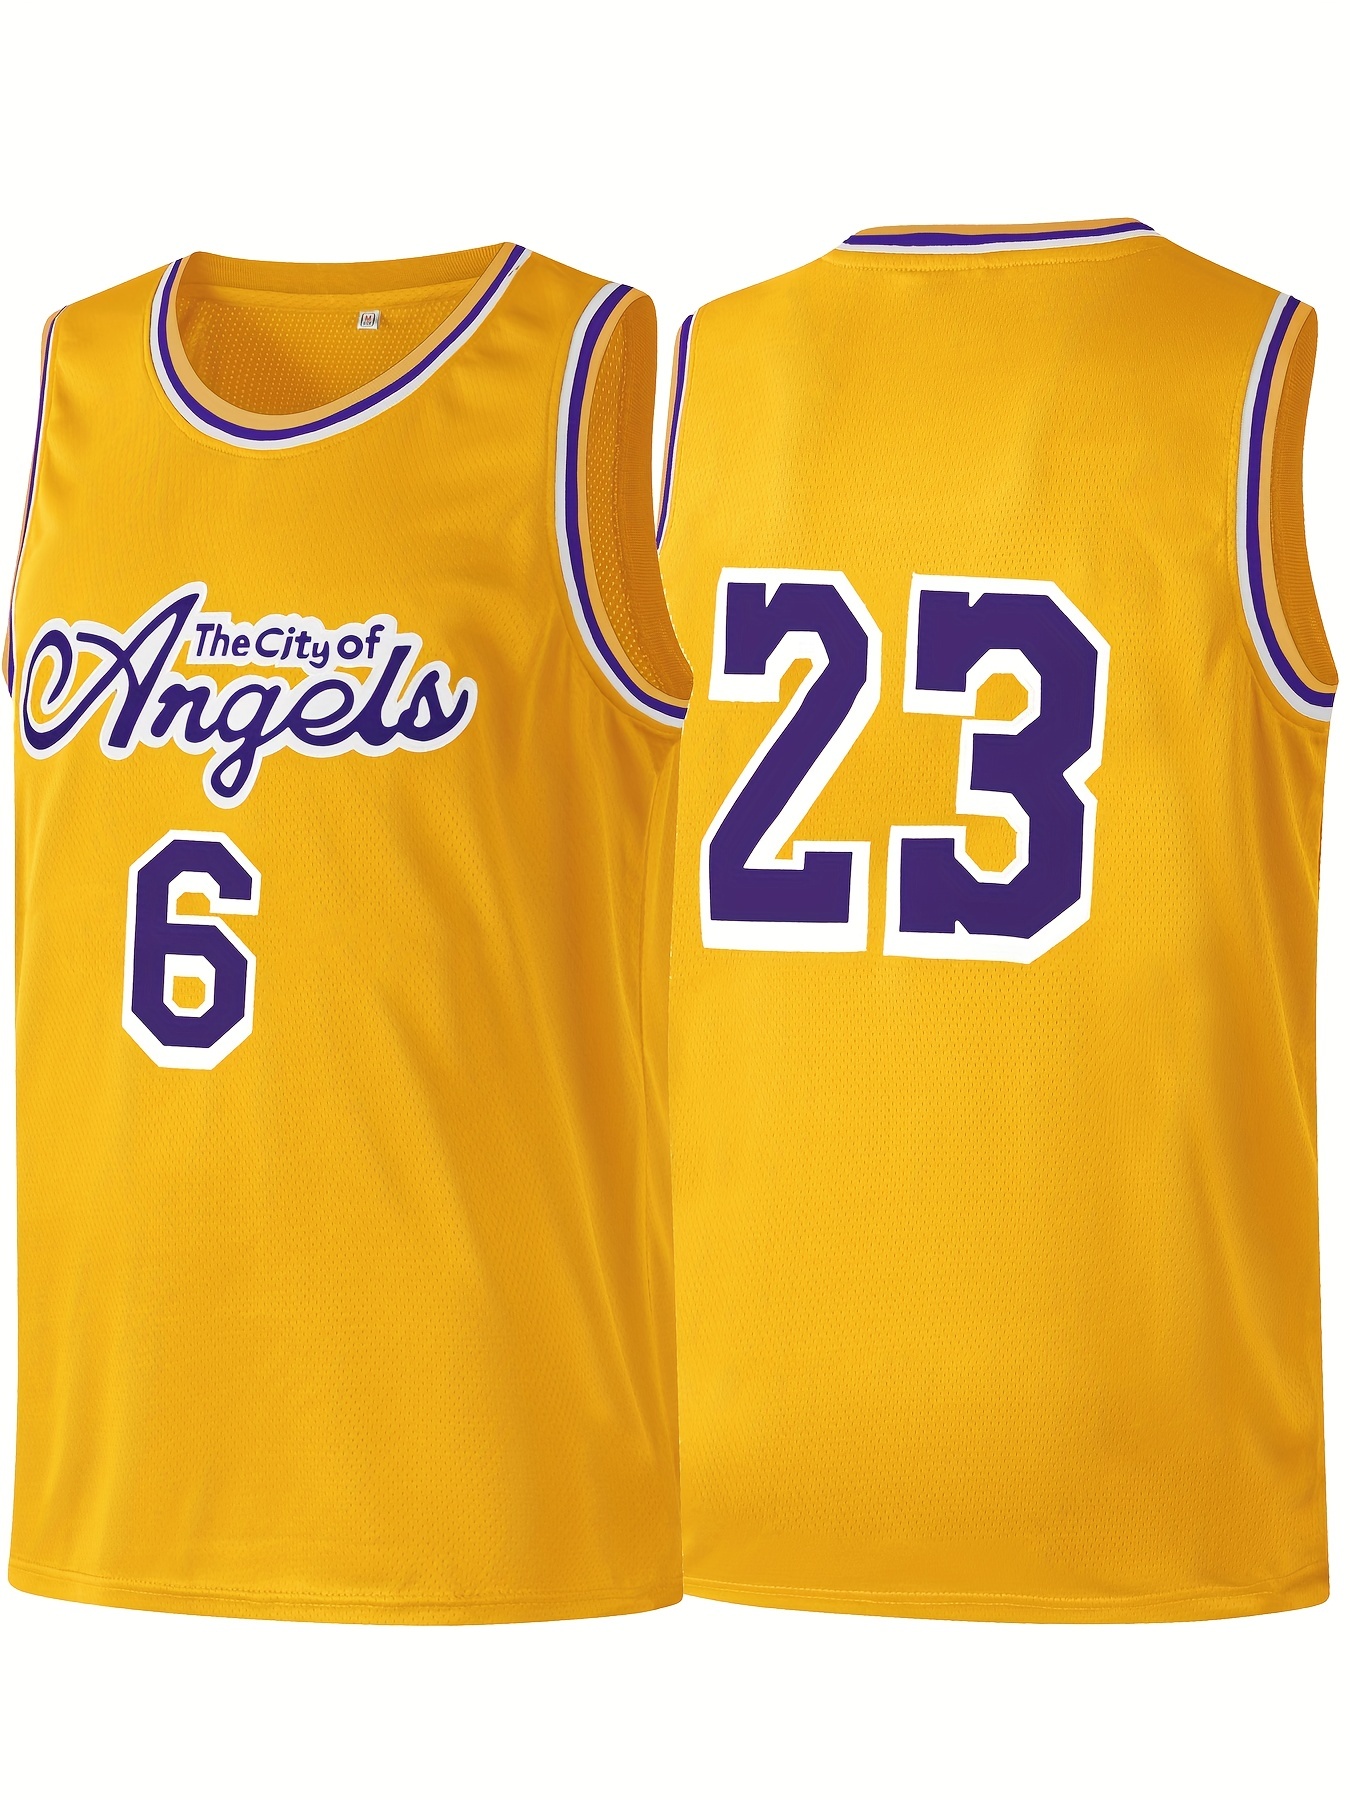 Design James #23 The City Of Angels Basketball Jersey Black Yellow